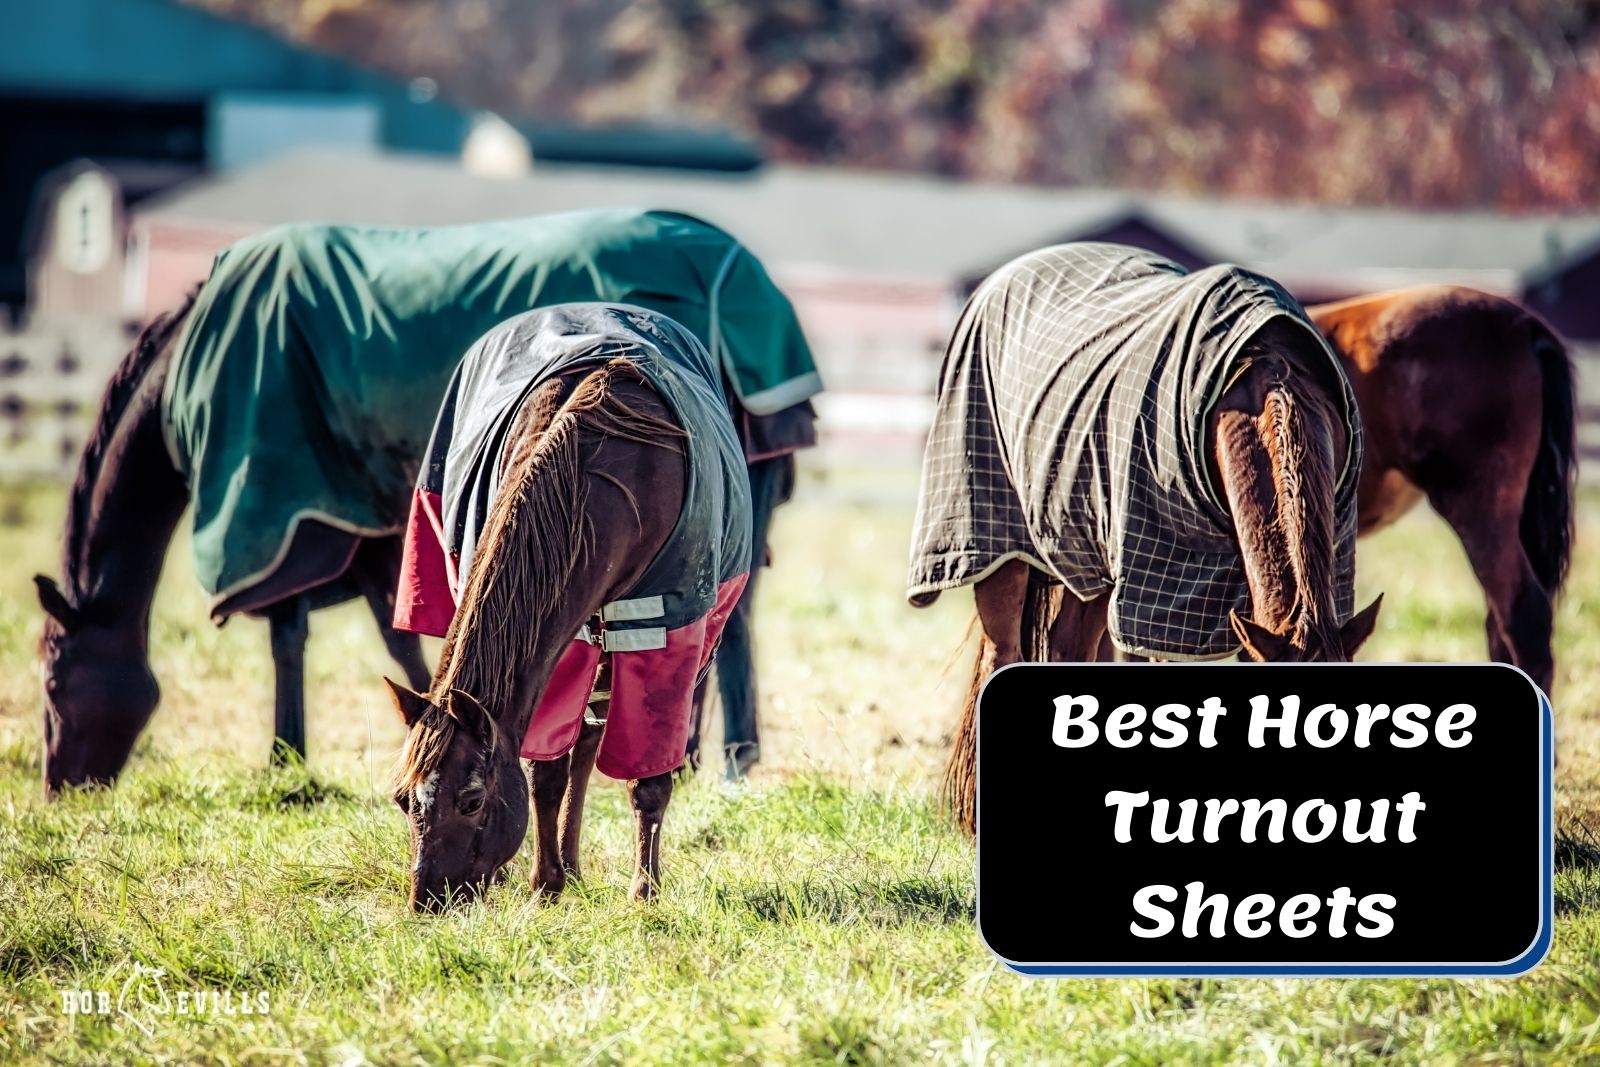 group of horses eating grasses while wearing their best horse turnout sheets